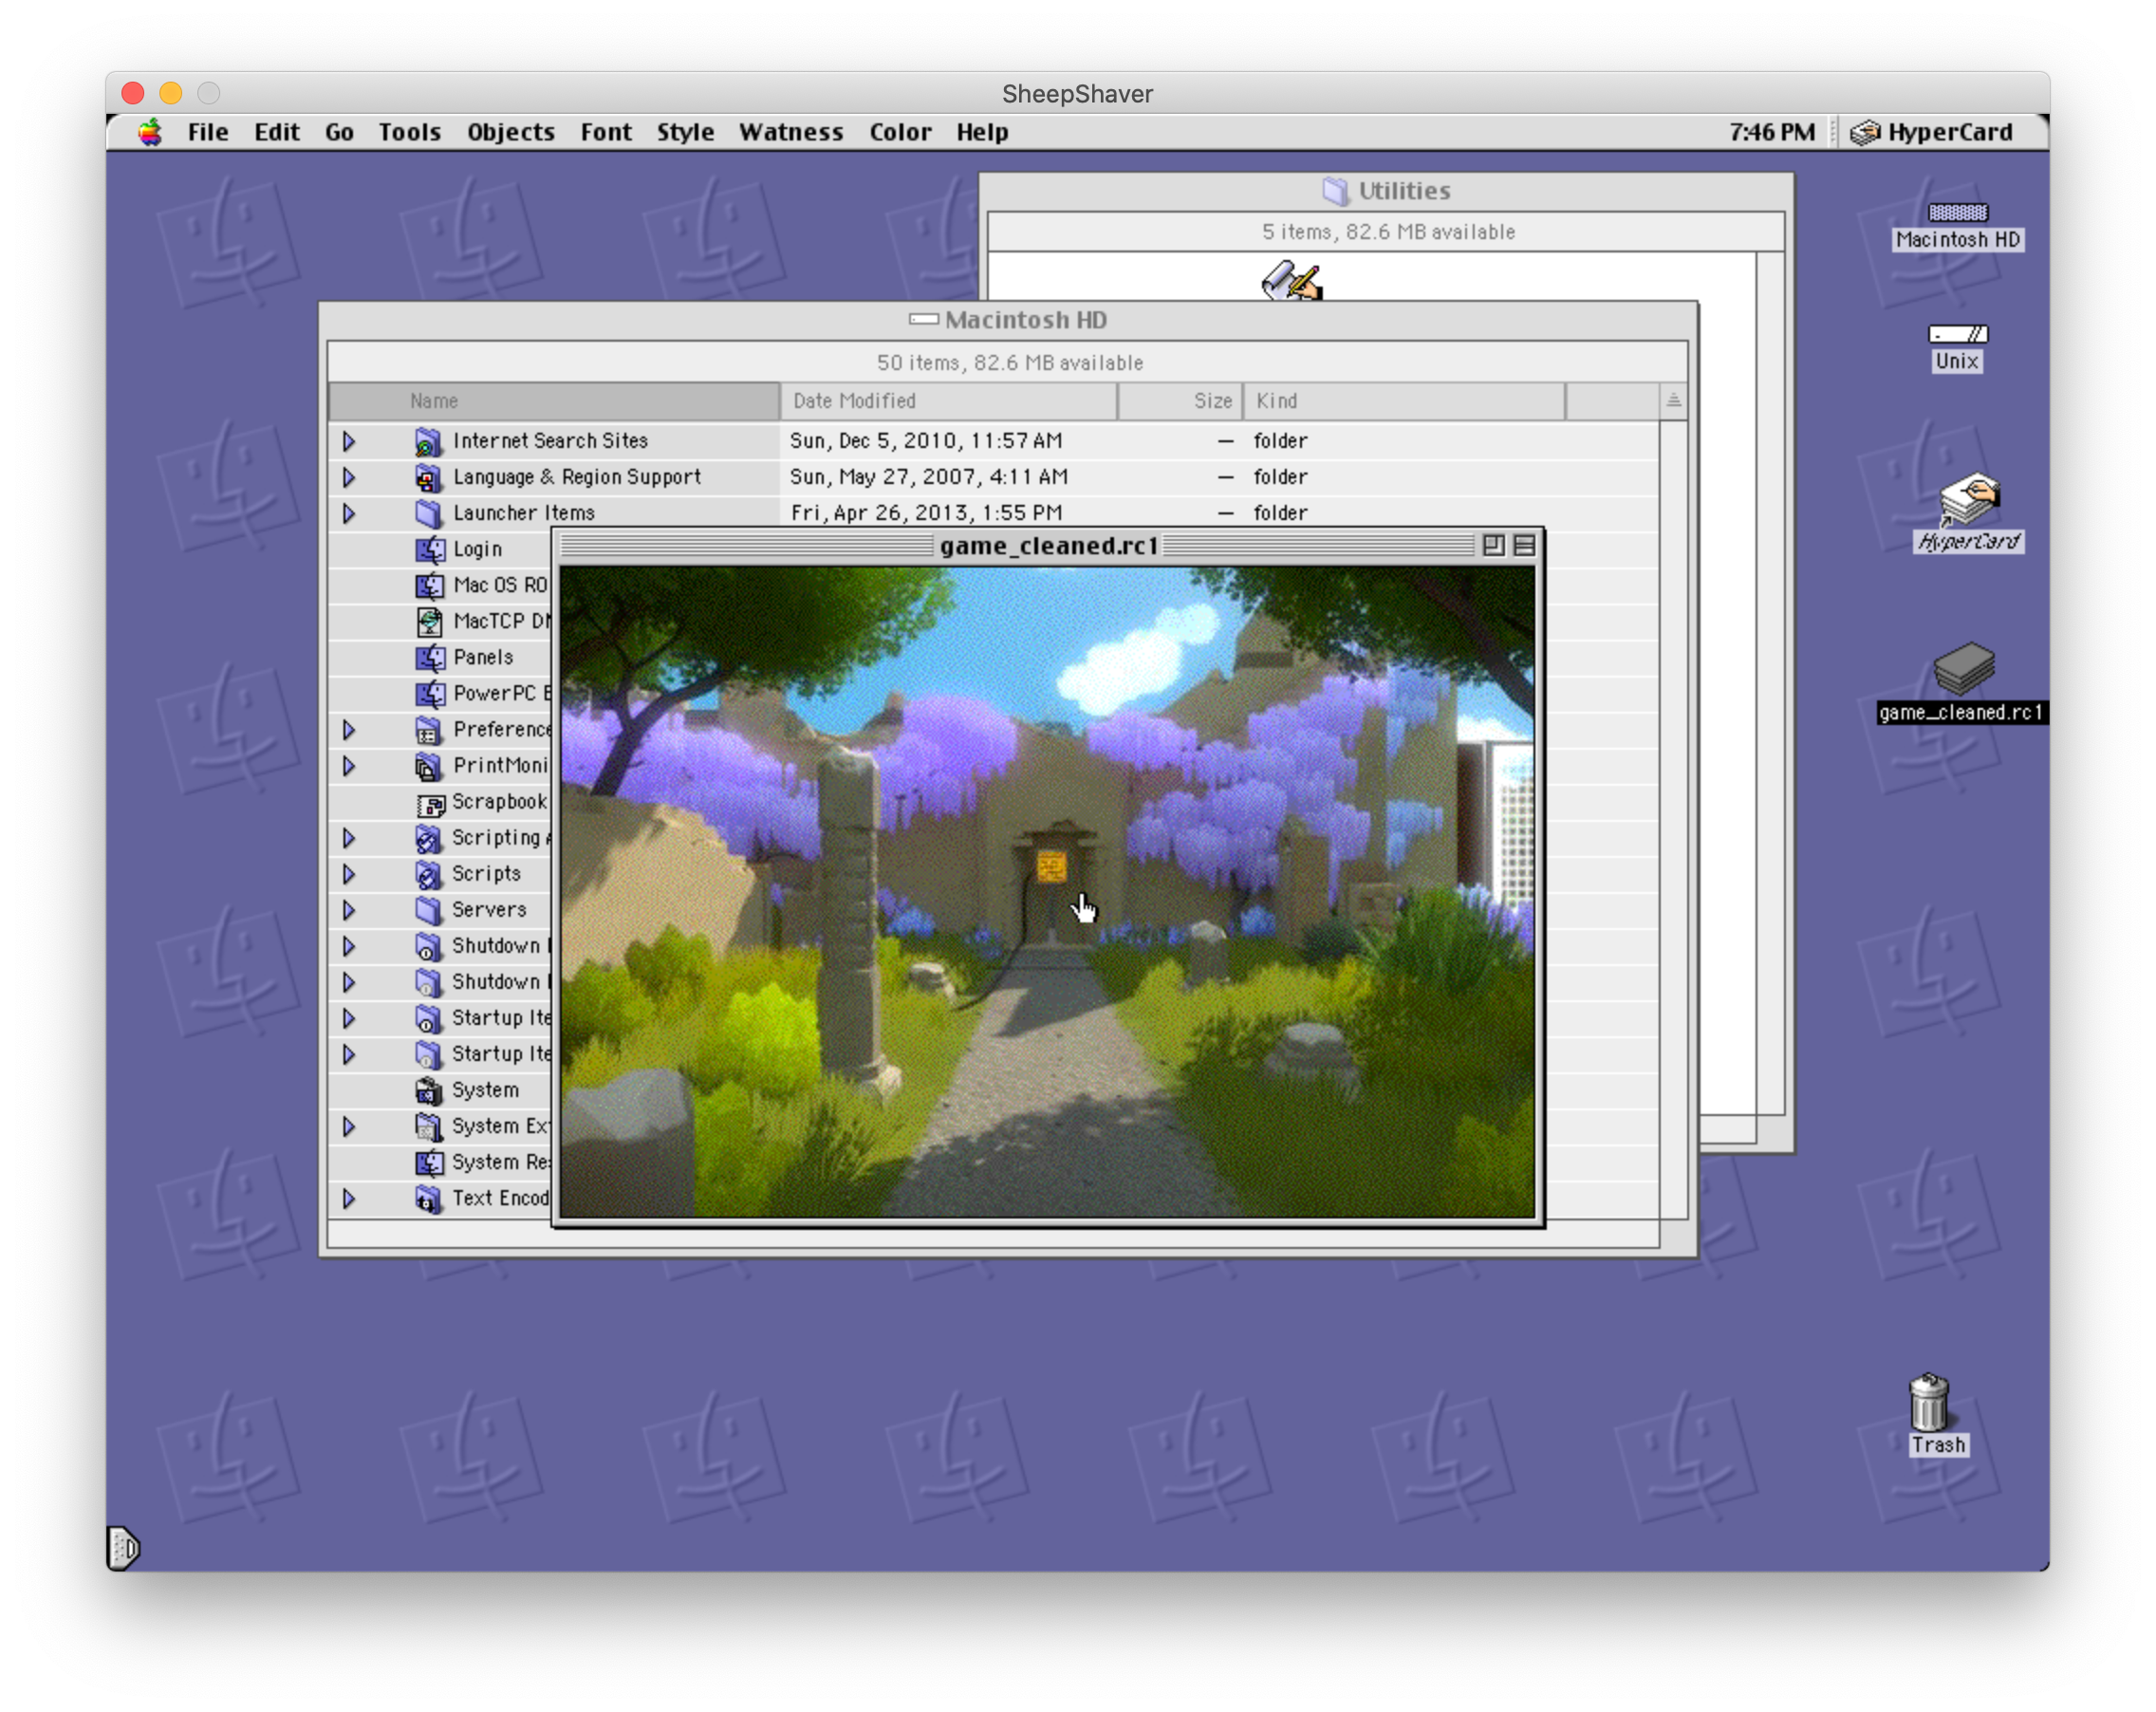 Screenshot of The Watness 2 HyperCard stack running in SheepShaver, showing a striking similarity to the setting of The Witness